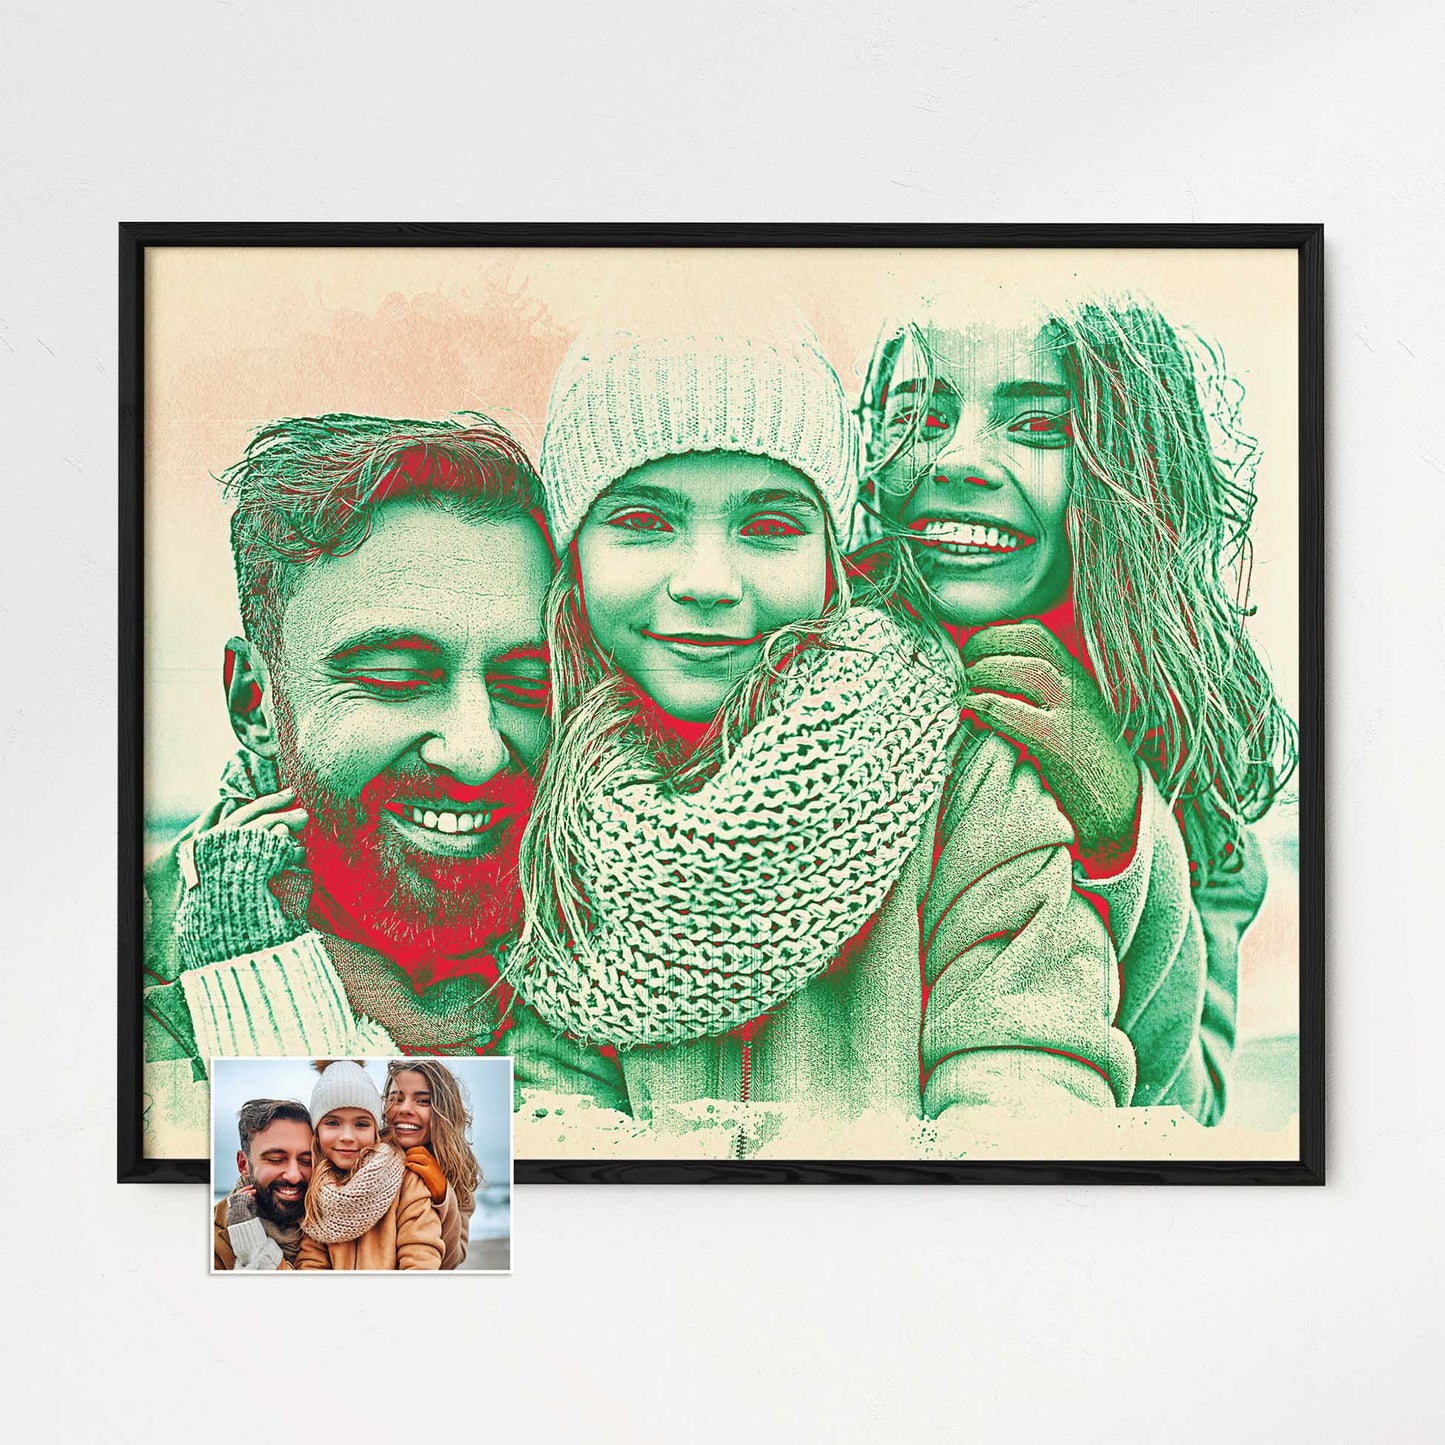 Painting from Photo: Witness your cherished memories come to life with this personalised red and green framed print. Using the enchanting watercolour style, it captures the essence of your photo, ensuring a one-of-a-kind and creative art